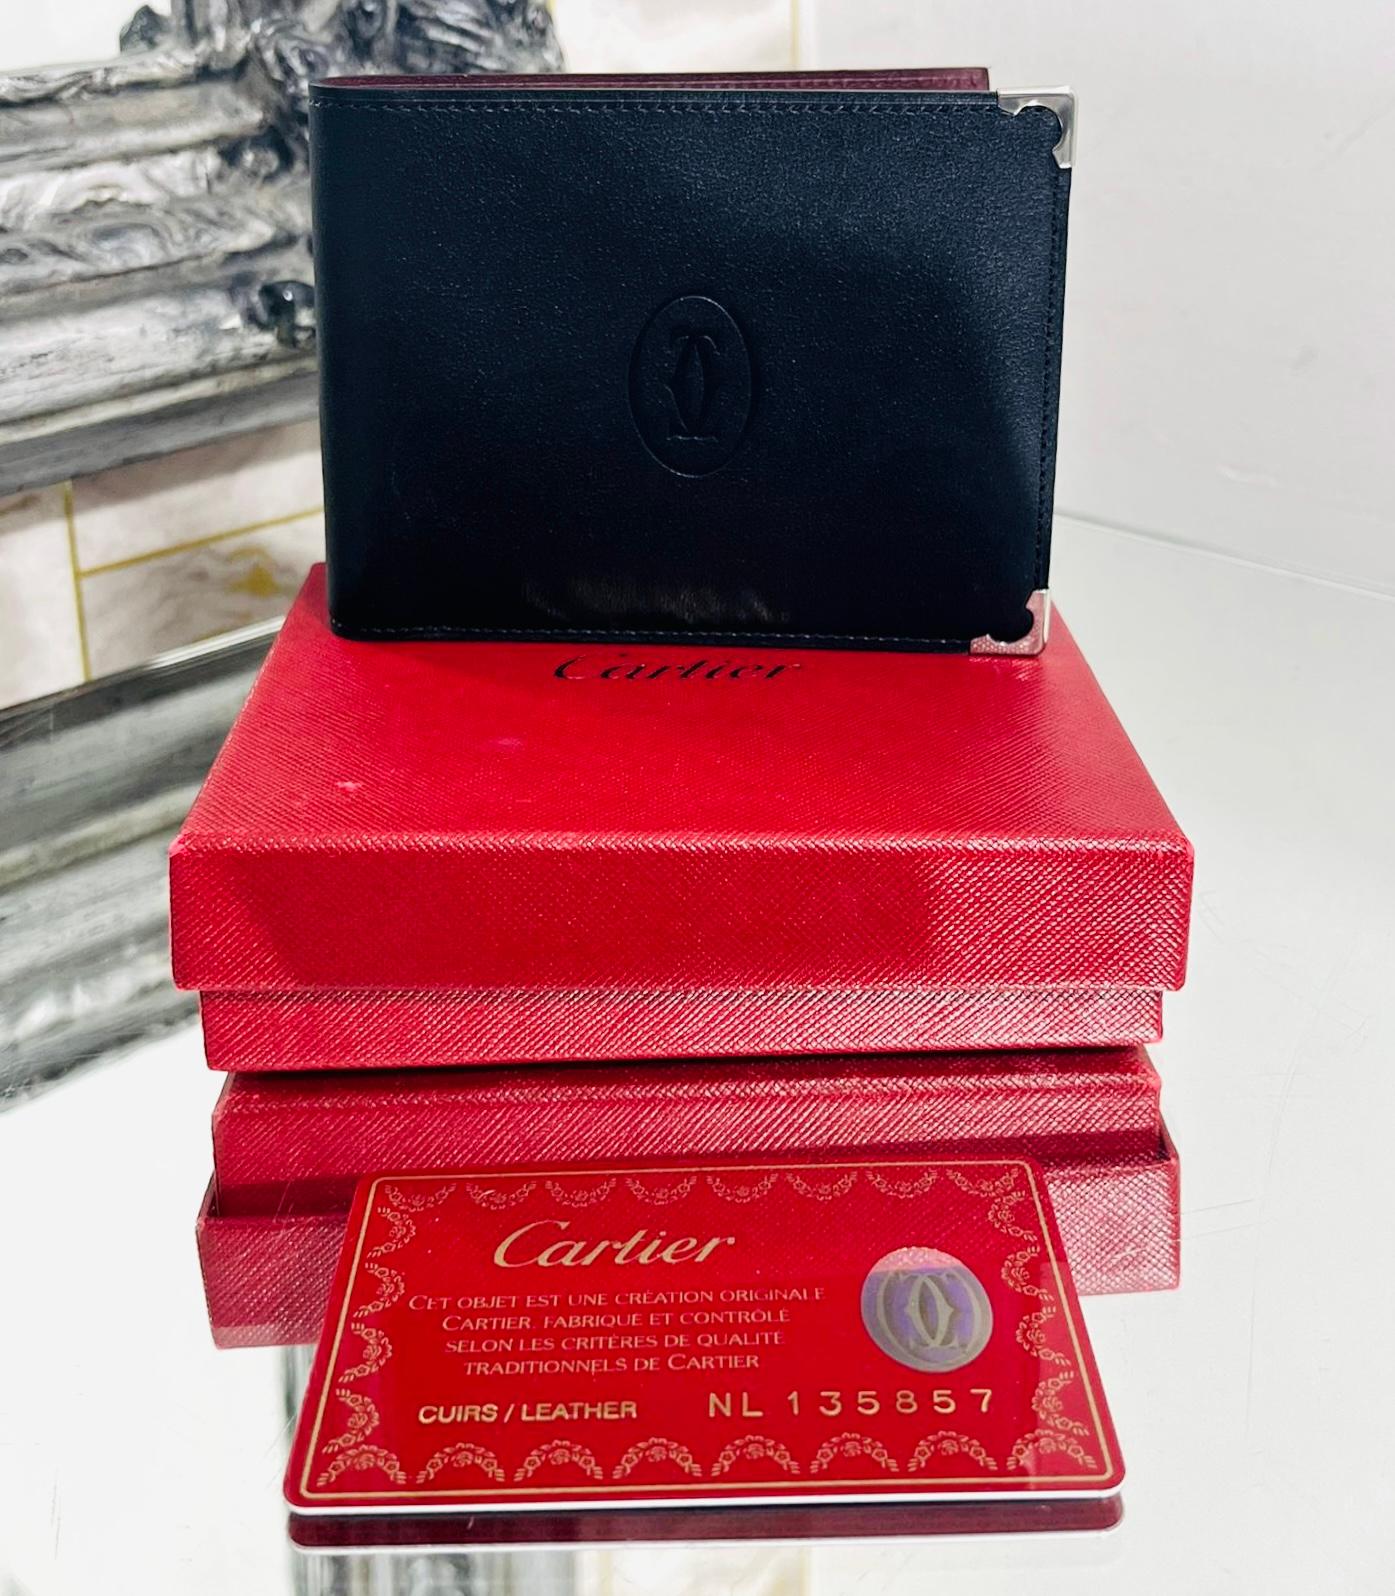 Cartier Credit Card Leather Wallet

Black wallet designed with iconic 'Double C' logo embossed to the centre.

Detailed with stainless-steel metalic finished corners.

Featuring burgundy leather interior with six card slots and banknote pocket. Rrp